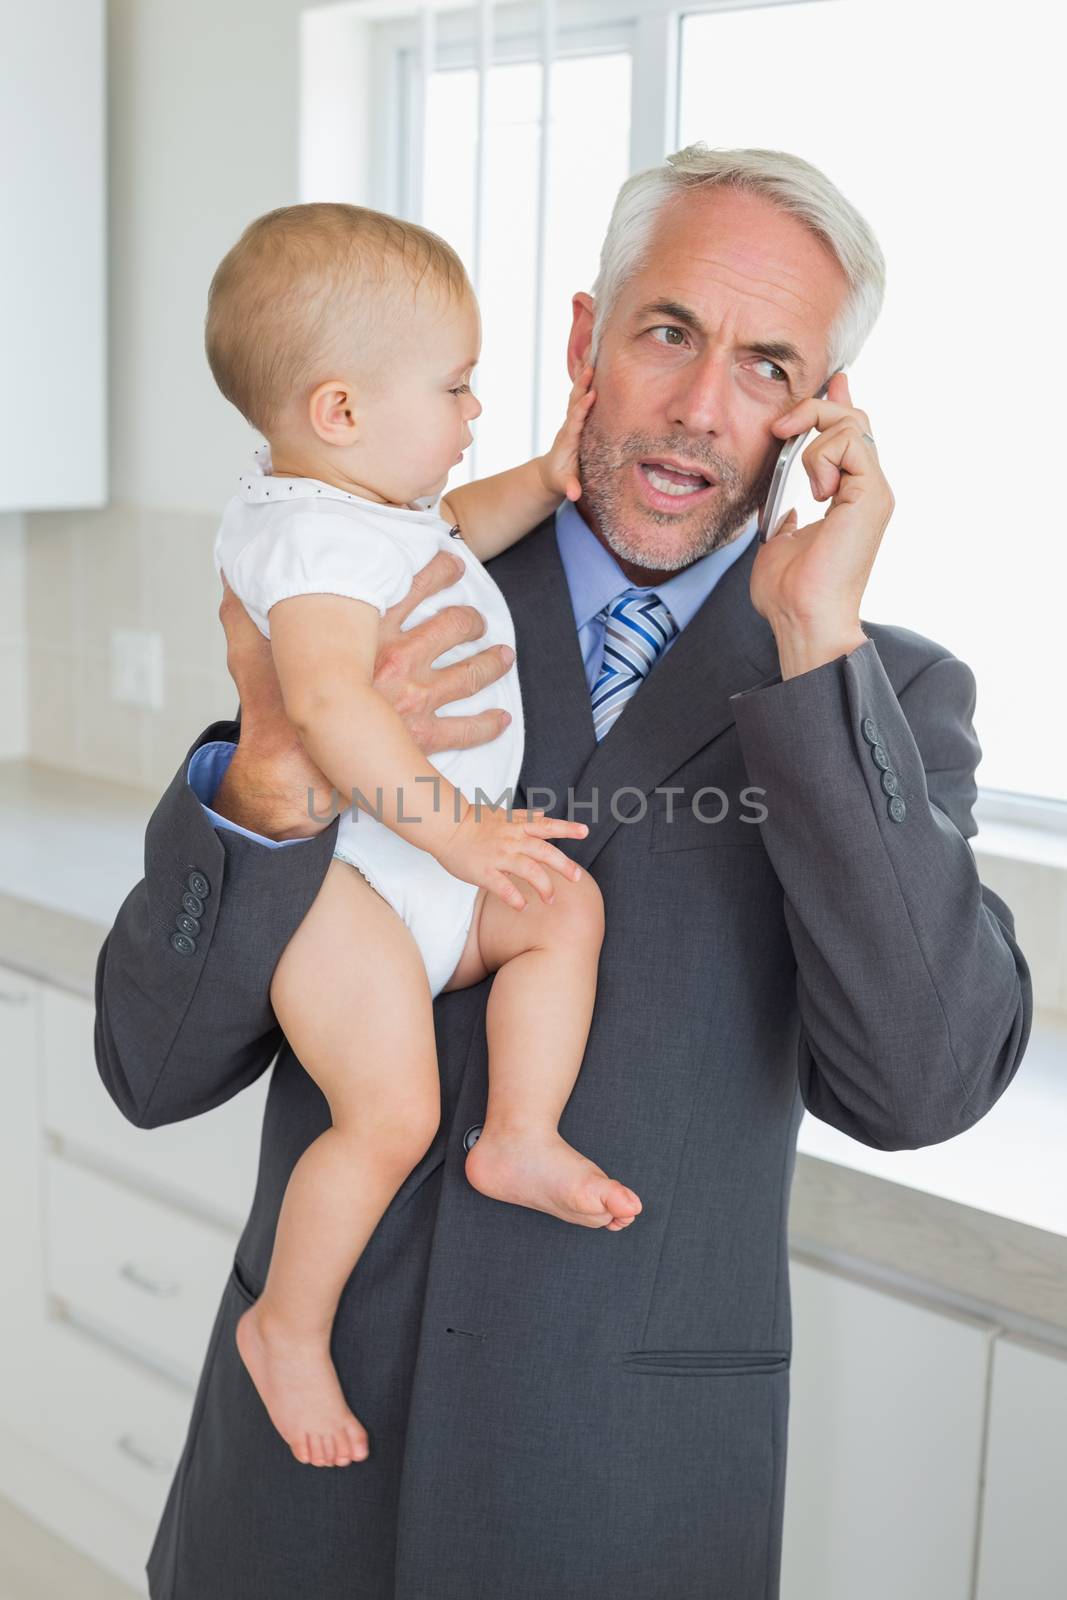 Distracted businessman holding his baby in the morning before work at home in the kitchen